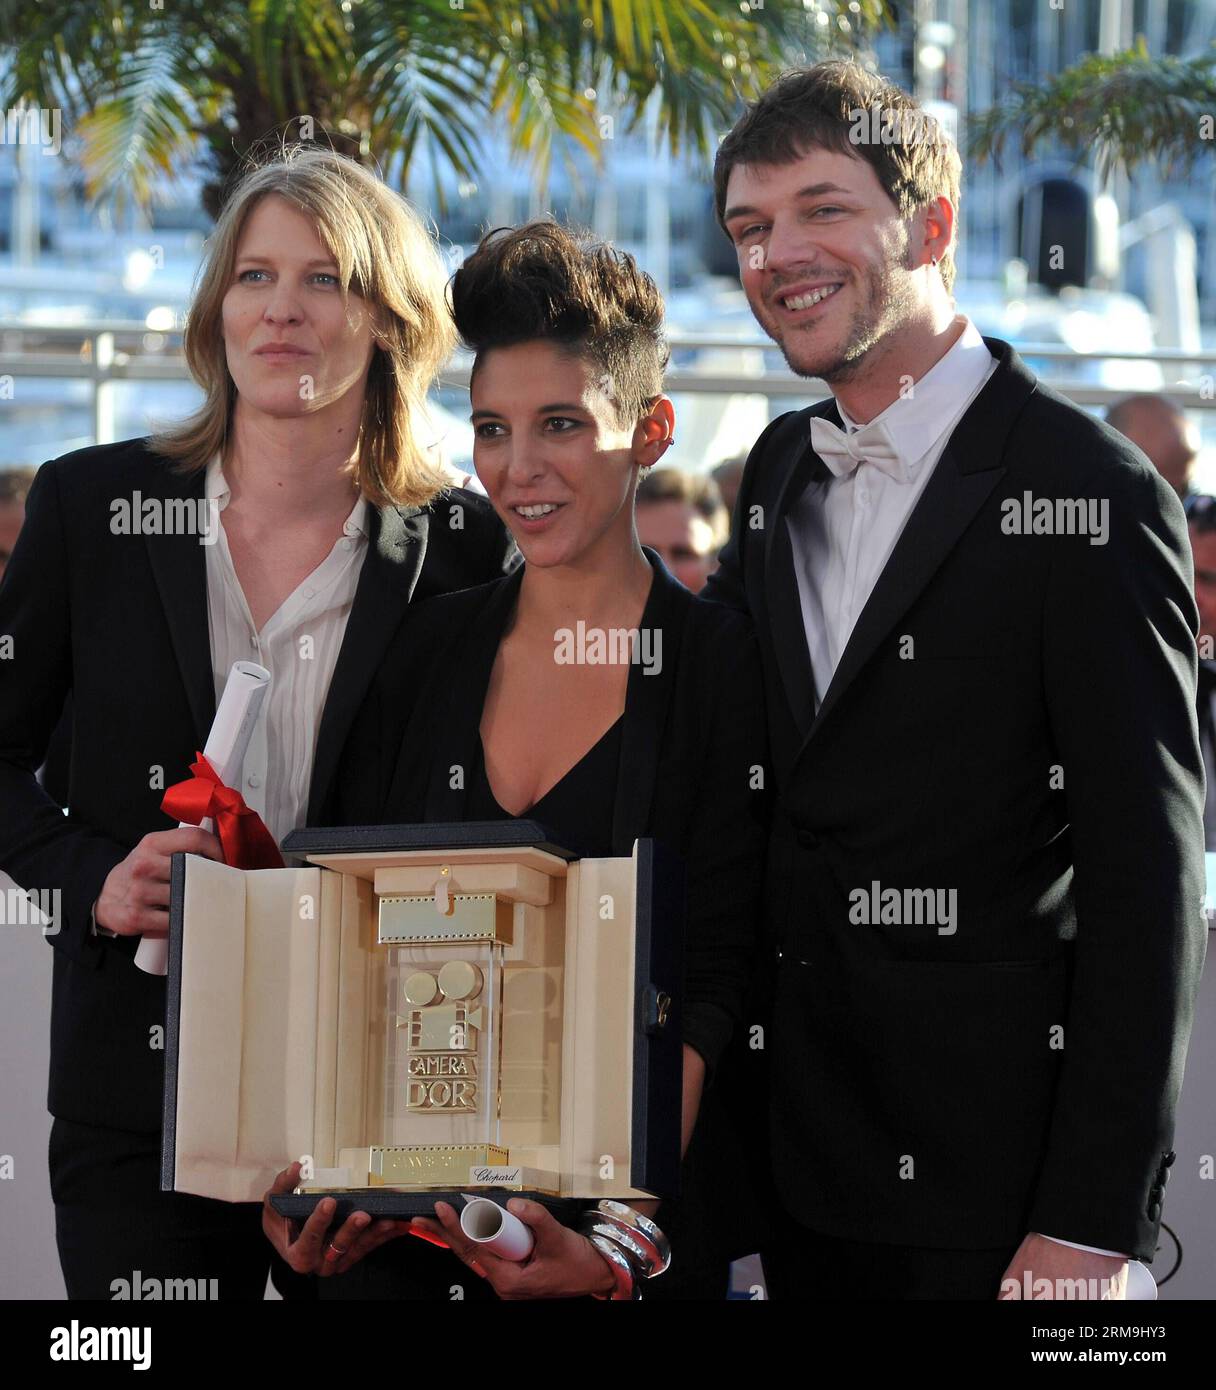 (140524) -- CANNES, May 24, 2014 (Xinhua) -- French directors Marie Amachoukeli, Claire Burger and Samuel Theis (L to R) present the Camera d Or prize of the 67th Cannes Film Festival for the film Party Girl, in Cannes, France, May 24, 2014.(Xinhua/Chen Xiaowei) FRANCE-CANNES-FILM FESTIVAL-AWARDS PUBLICATIONxNOTxINxCHN   Cannes May 24 2014 XINHUA French Directors Marie  Claire Burger and Samuel Theis l to r Present The Camera D or Prize of The 67th Cannes Film Festival for The Film Party Girl in Cannes France May 24 2014 XINHUA Chen Xiaowei France Cannes Film Festival Awards PUBLICATIONxNOTxIN Stock Photo